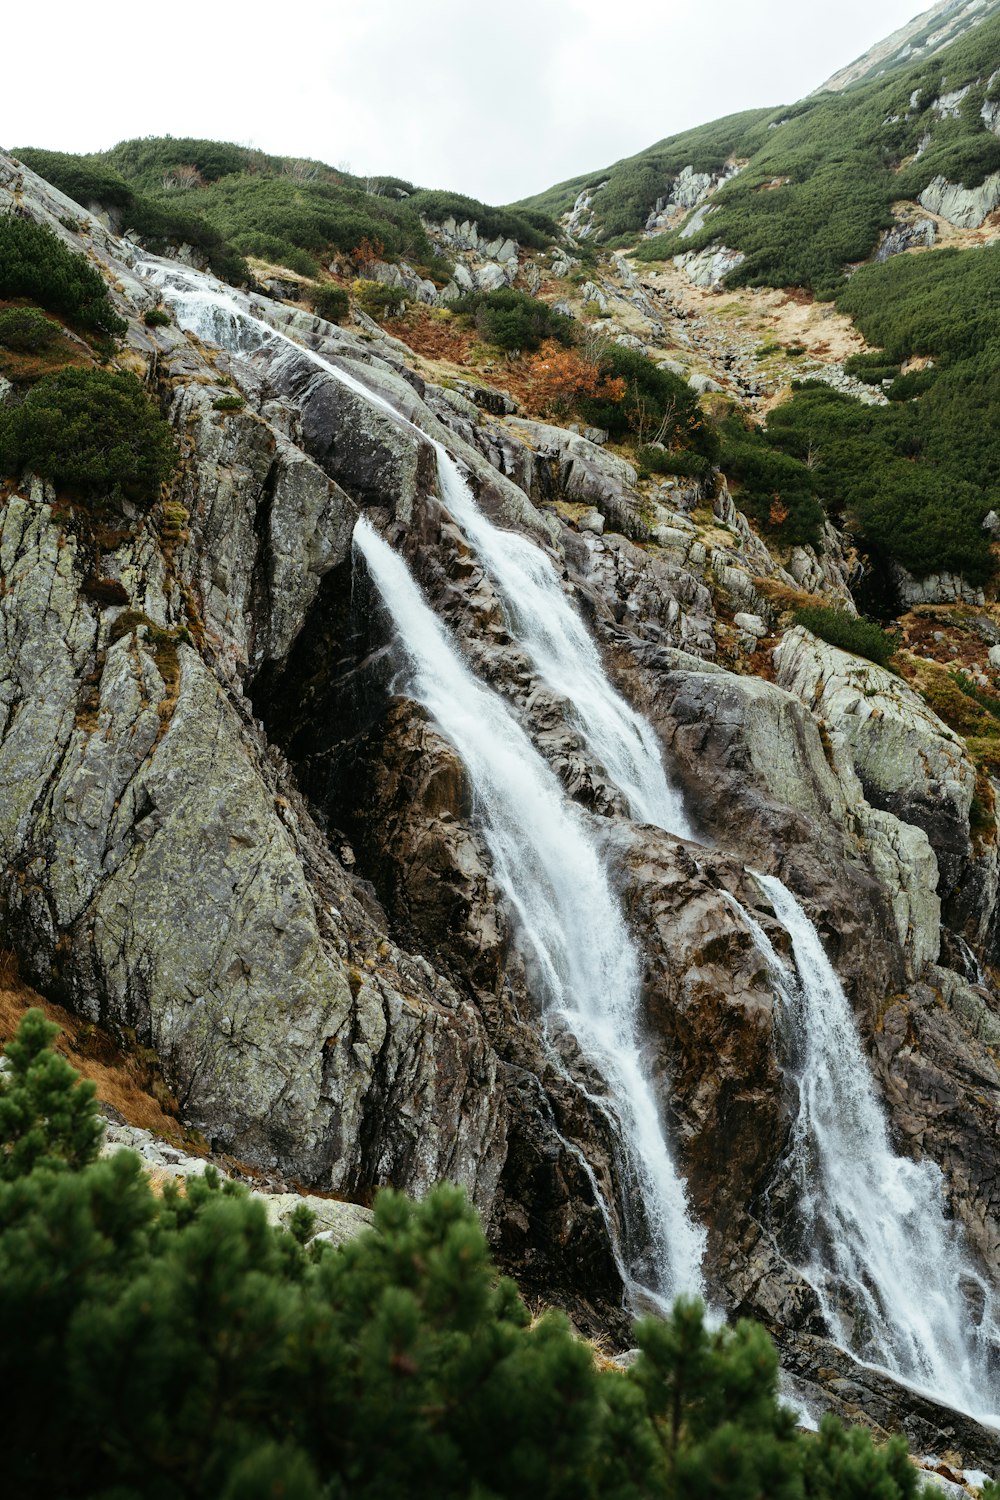 a waterfall in a rocky area